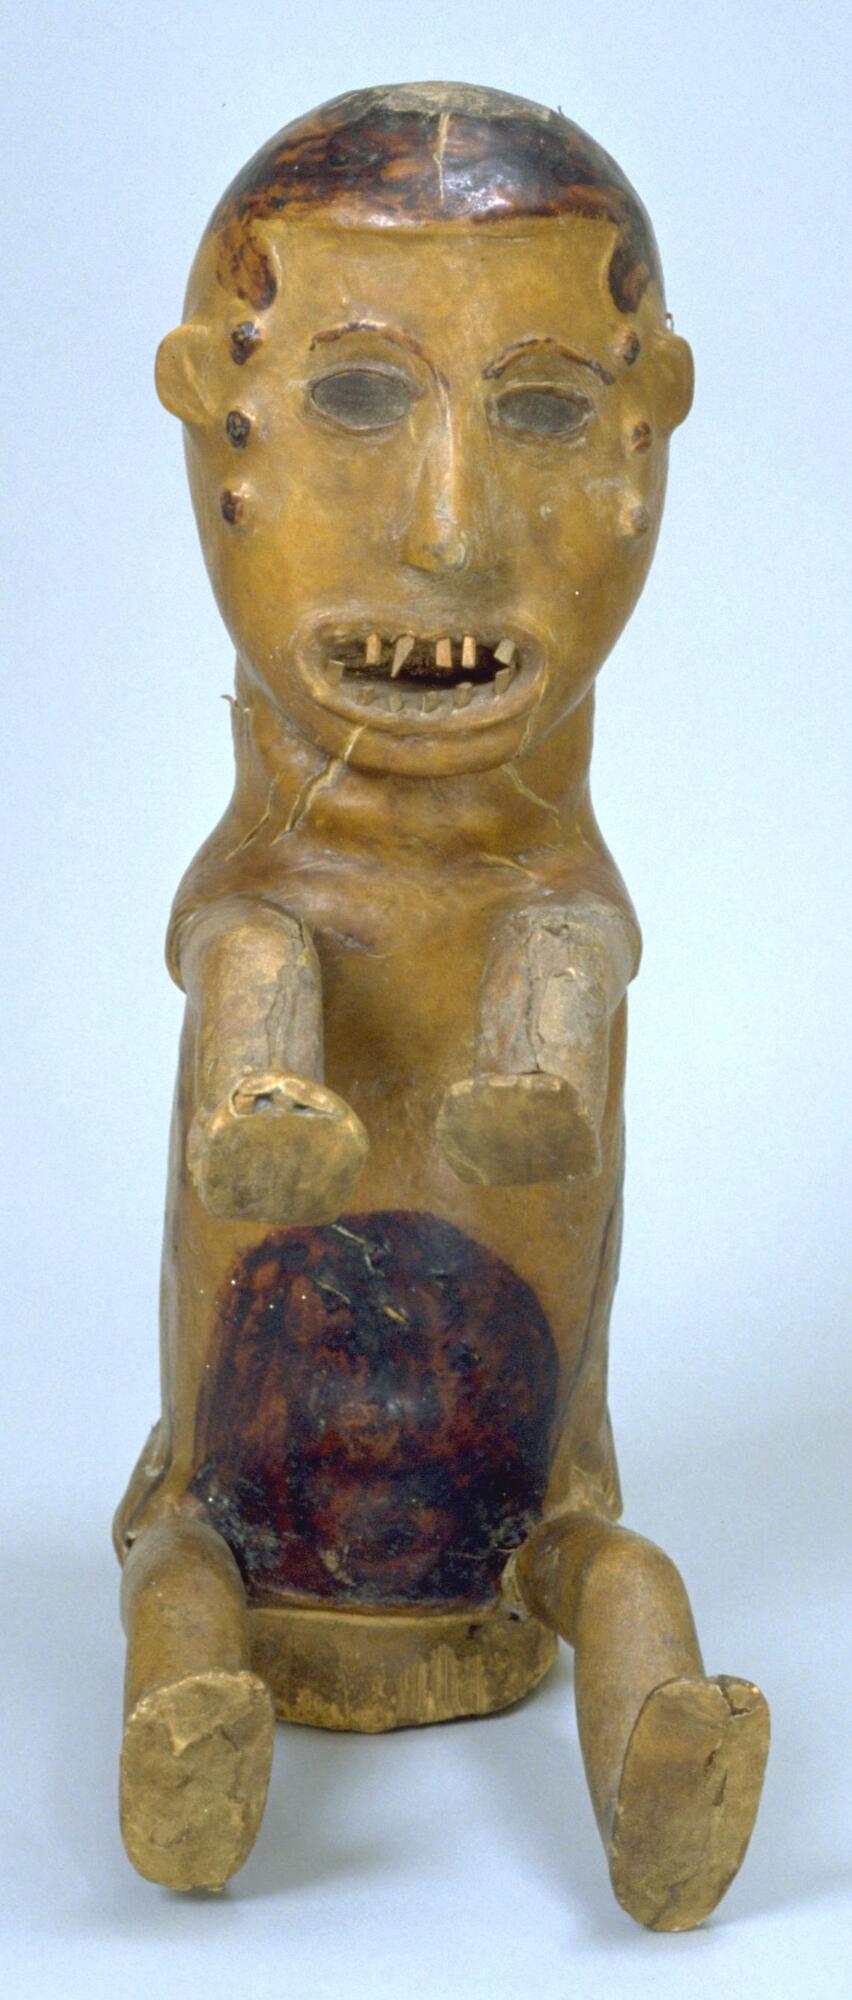 A wooden crest mask covered with antelope skin in the form of a human figure with a columnar body and four outstretched limbs. The center of the figure's abdomen is dyed a dark brown, while the rest of the skin is light in color. On each side of the face are three dark circles in a vertical line. 